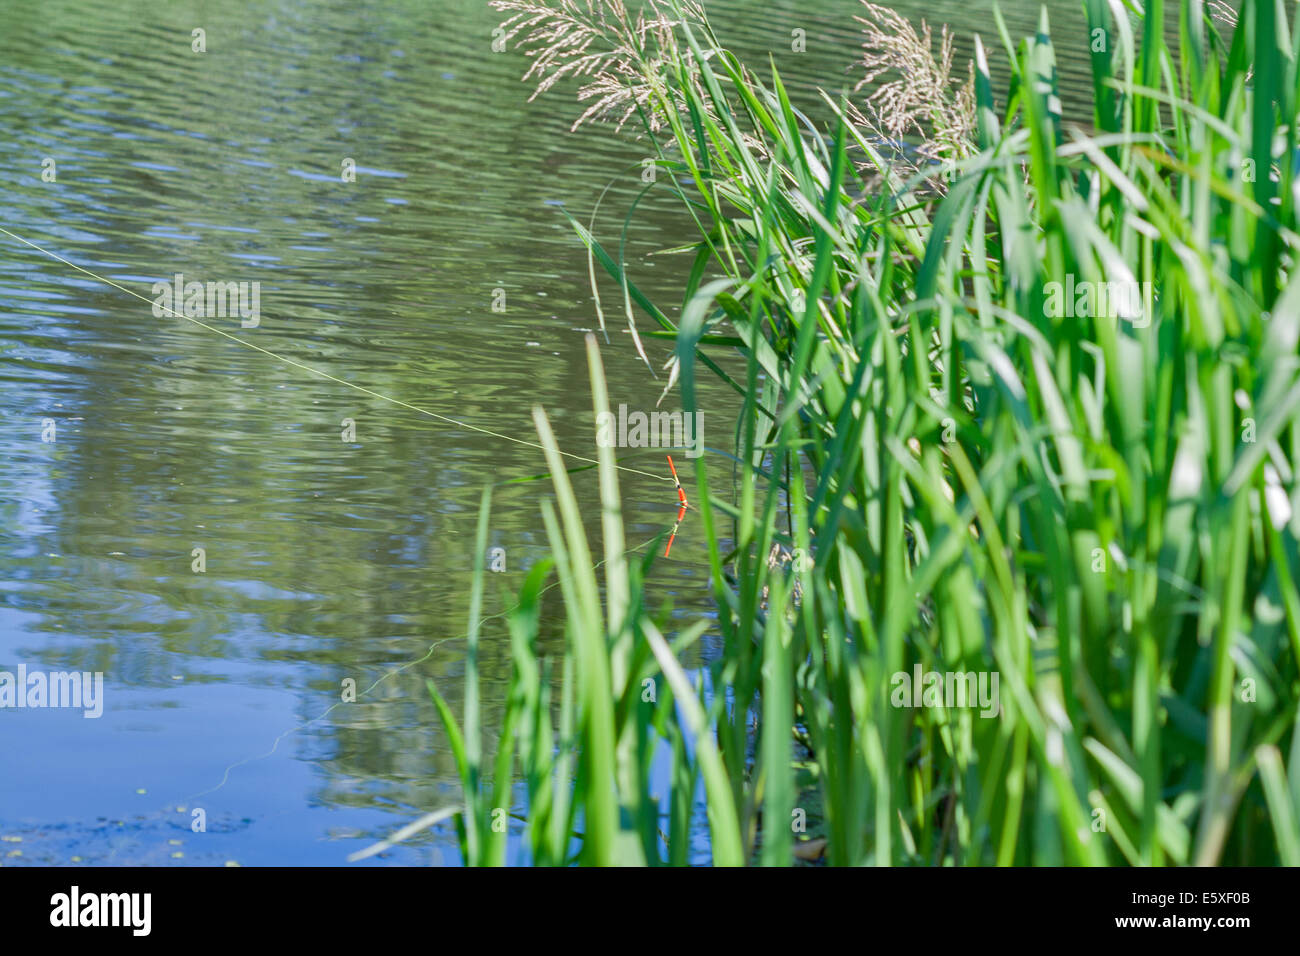 float fishing rod in the water canes Stock Photo